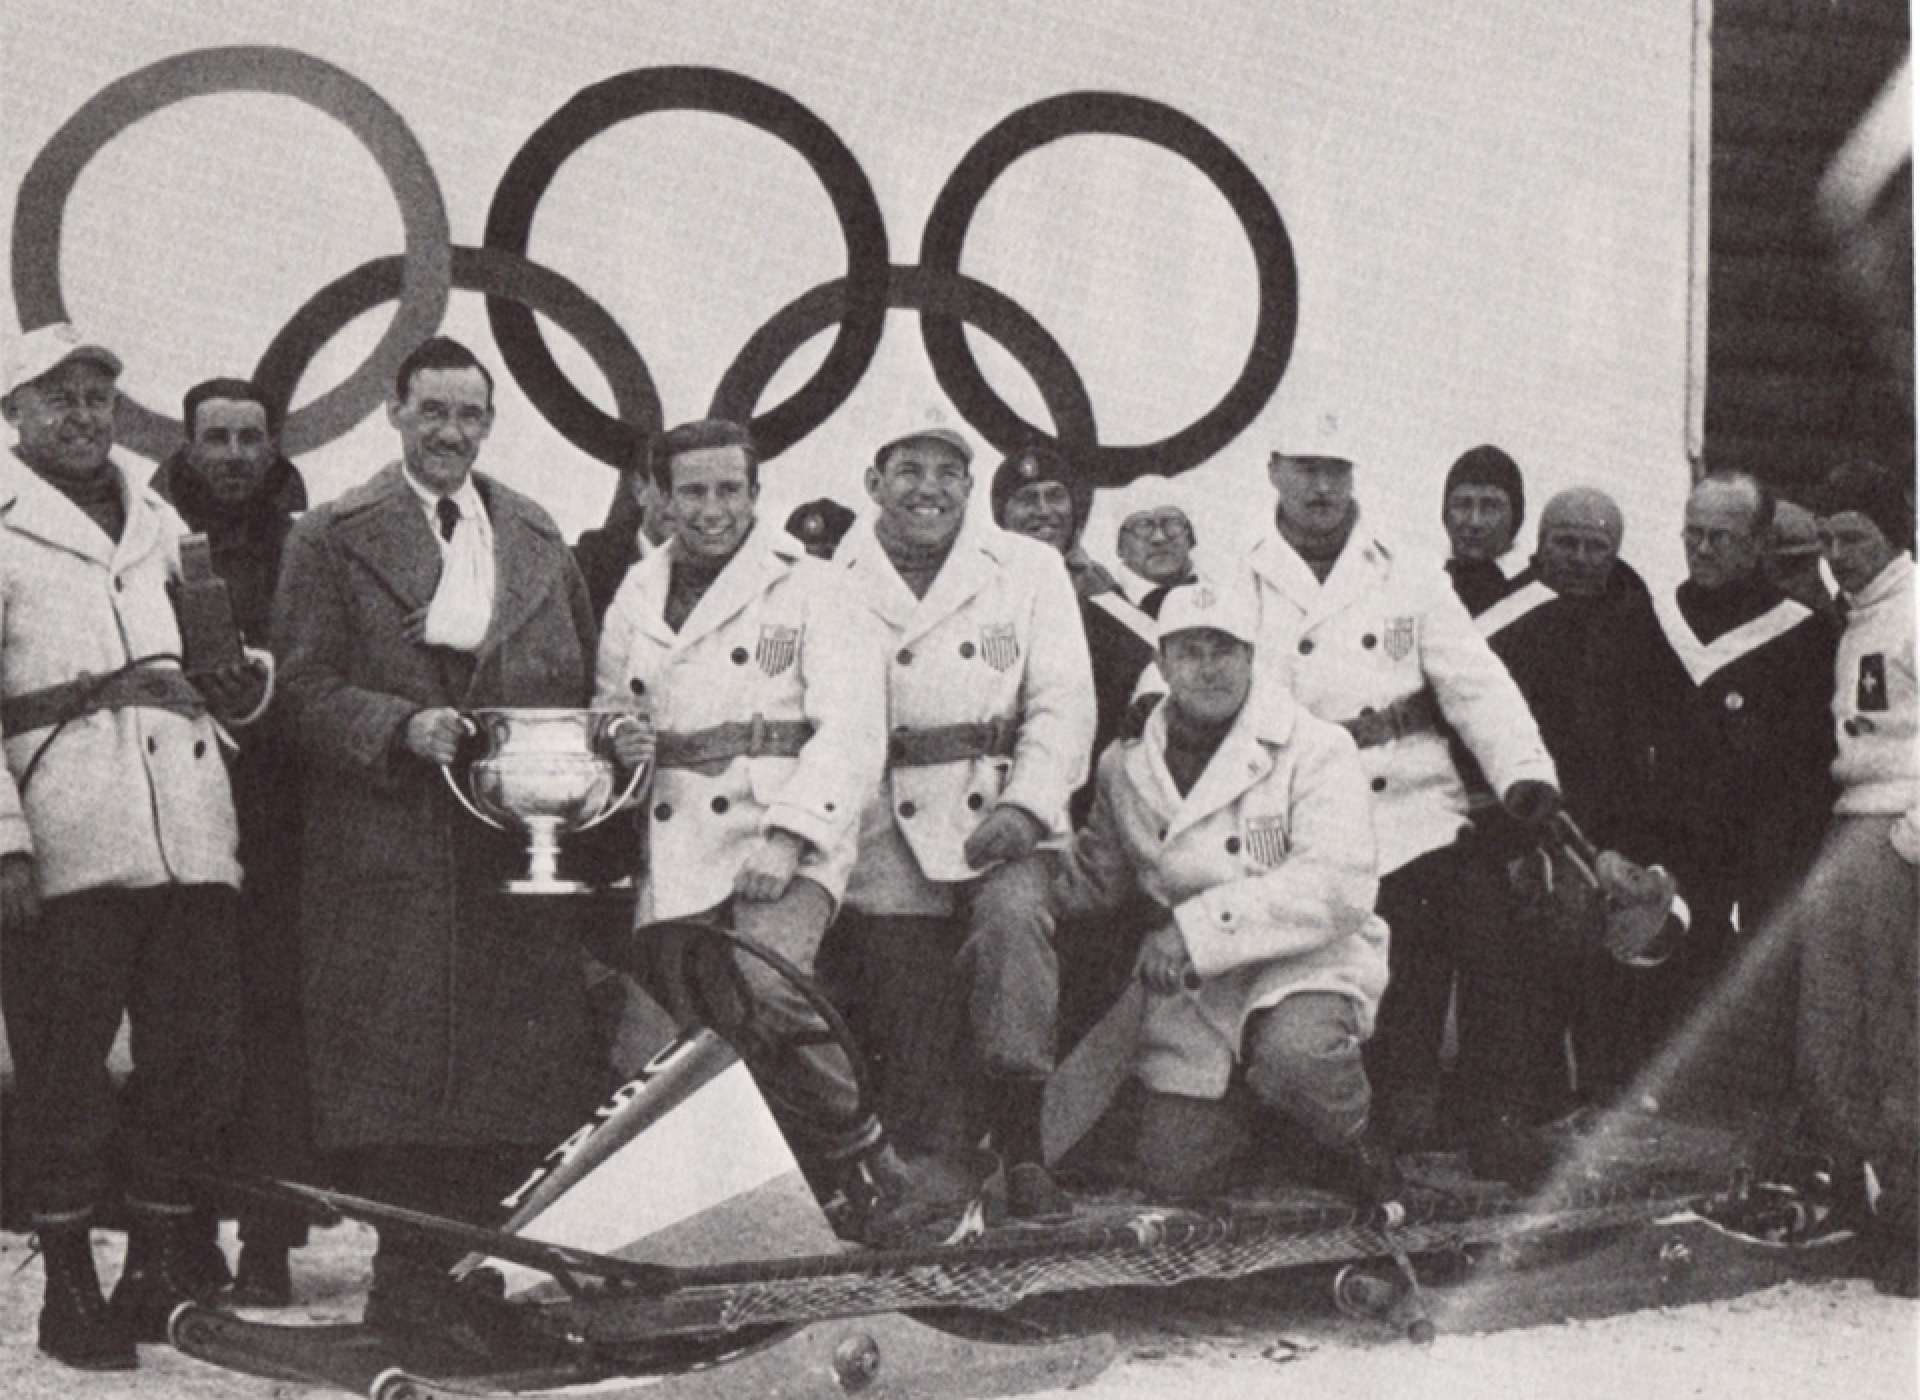 Billy Fiske and the 1932 Olympic bobsled team